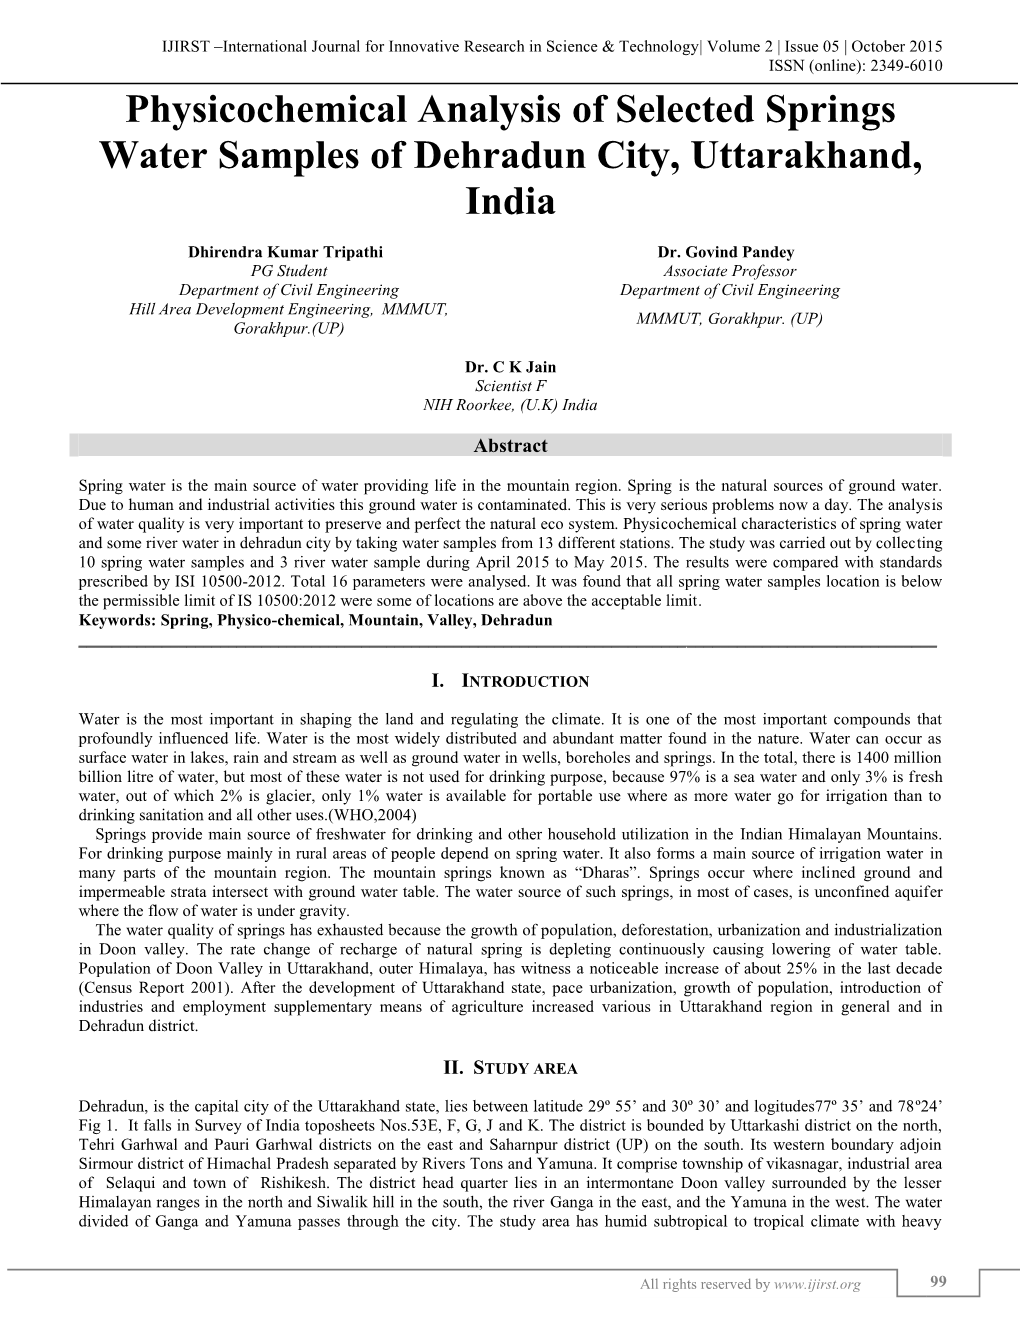 Physicochemical Analysis of Selected Springs Water Samples of Dehradun City, Uttarakhand